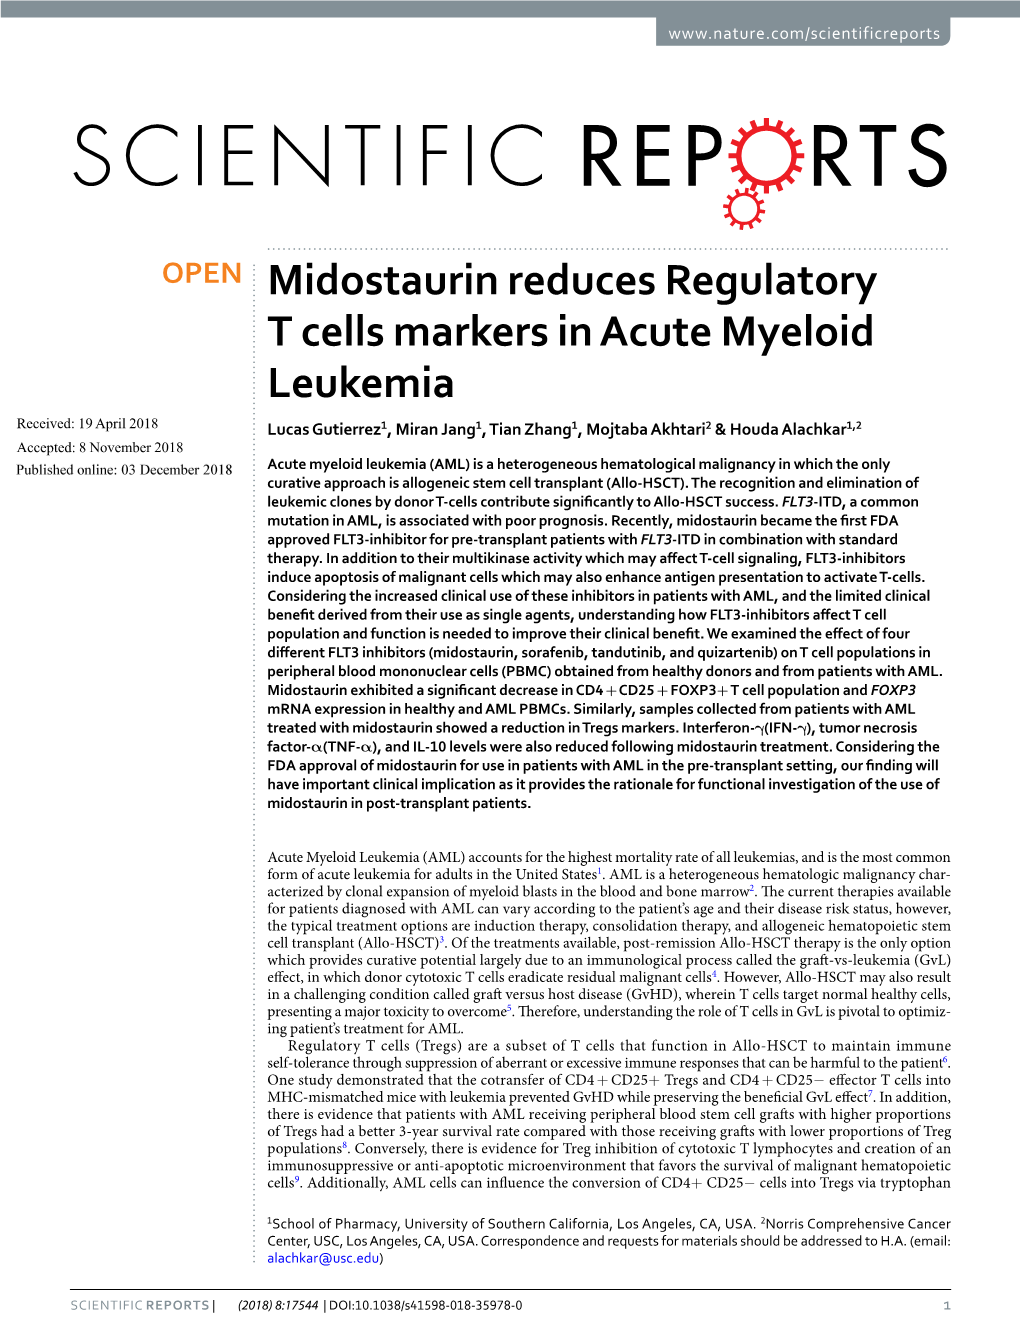 Midostaurin Reduces Regulatory T Cells Markers in Acute Myeloid